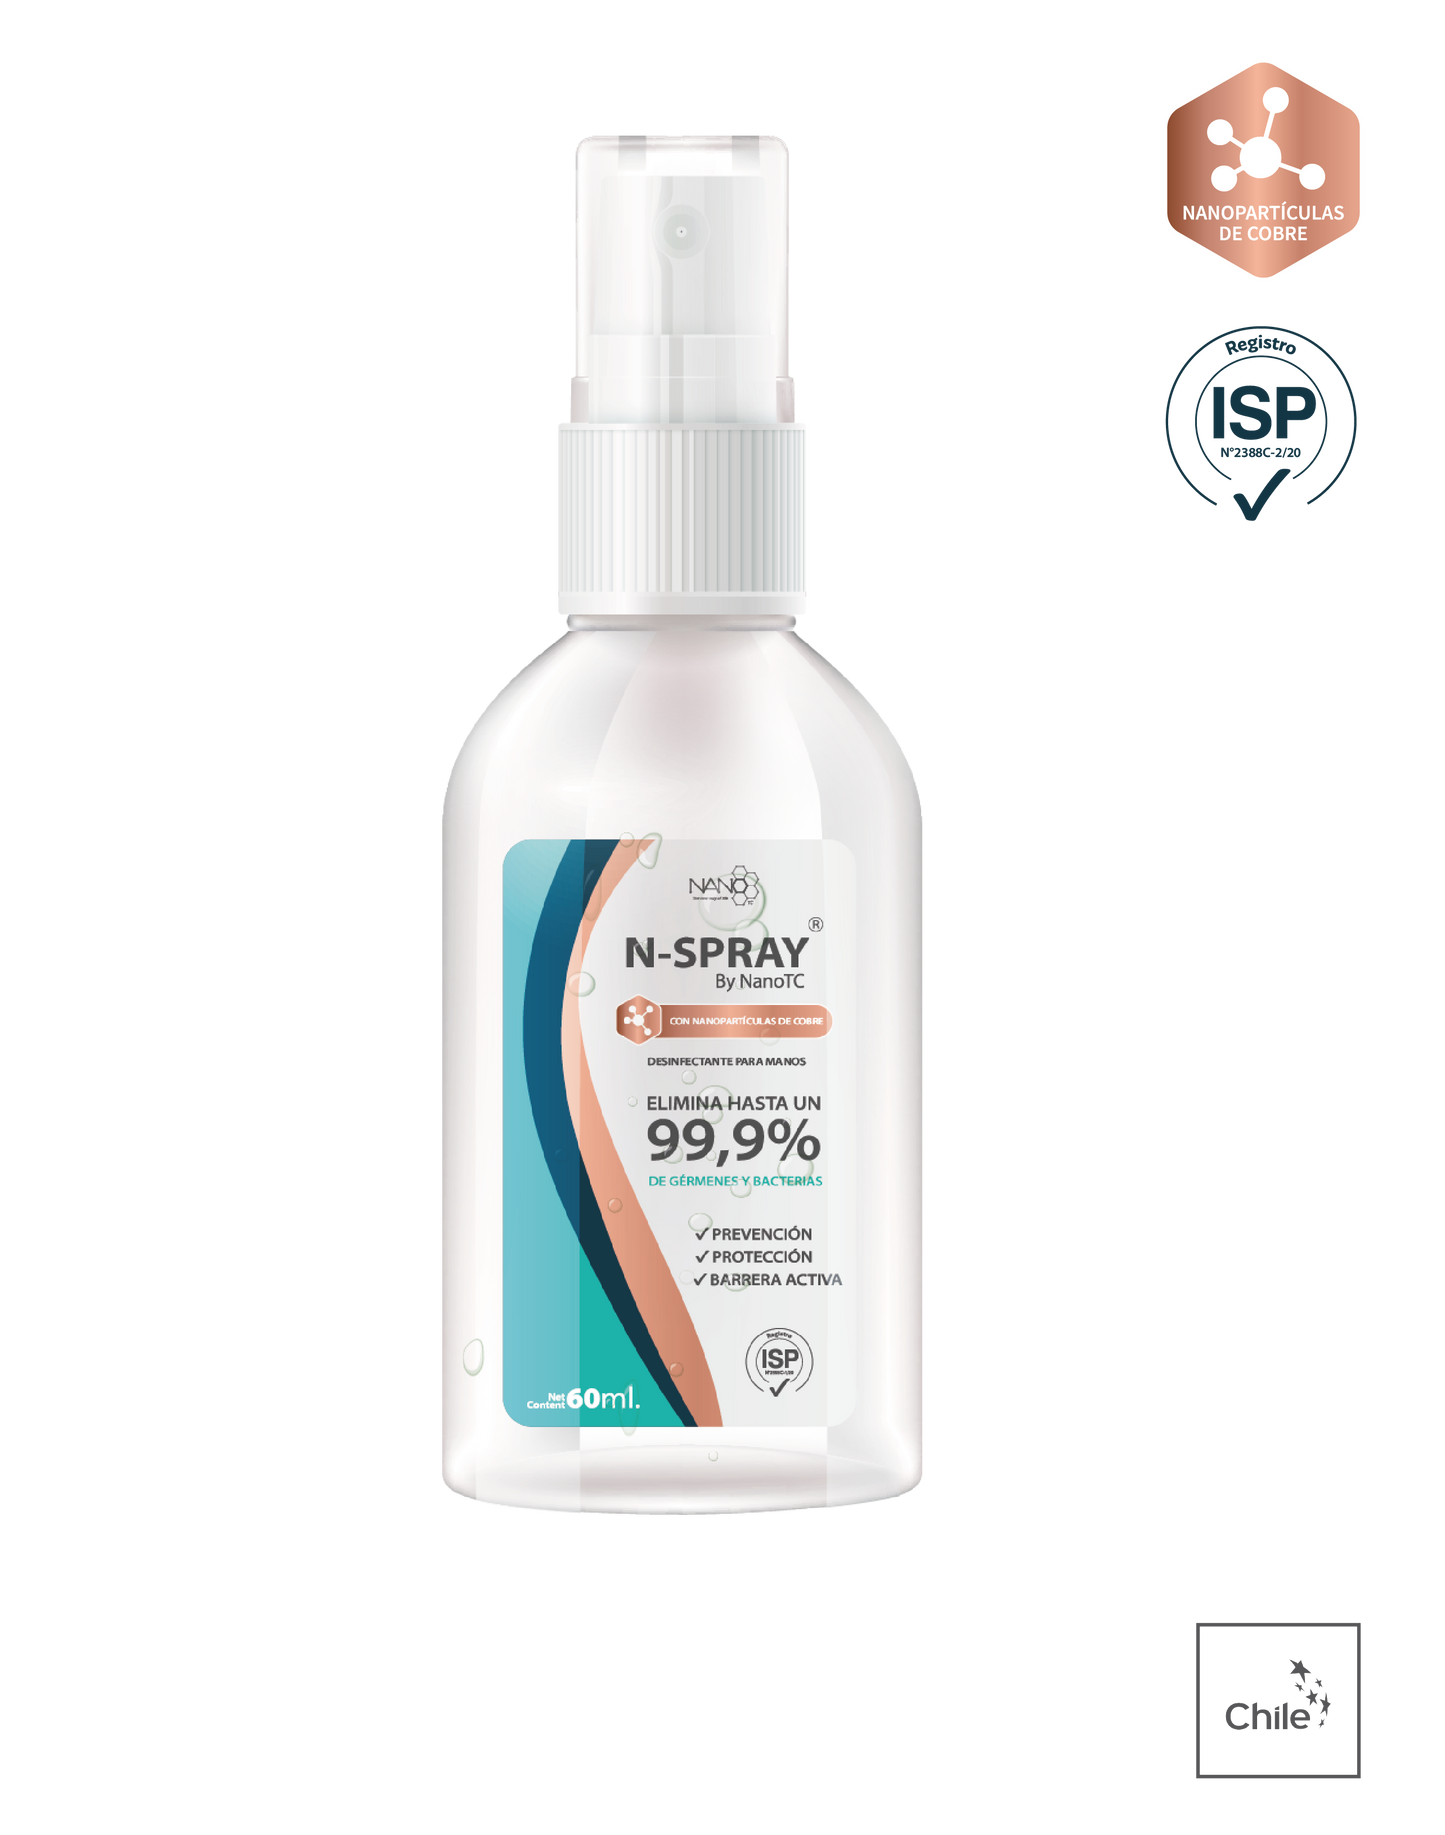 N spray – Alcohol sanitizer spray with copper nanoparticles